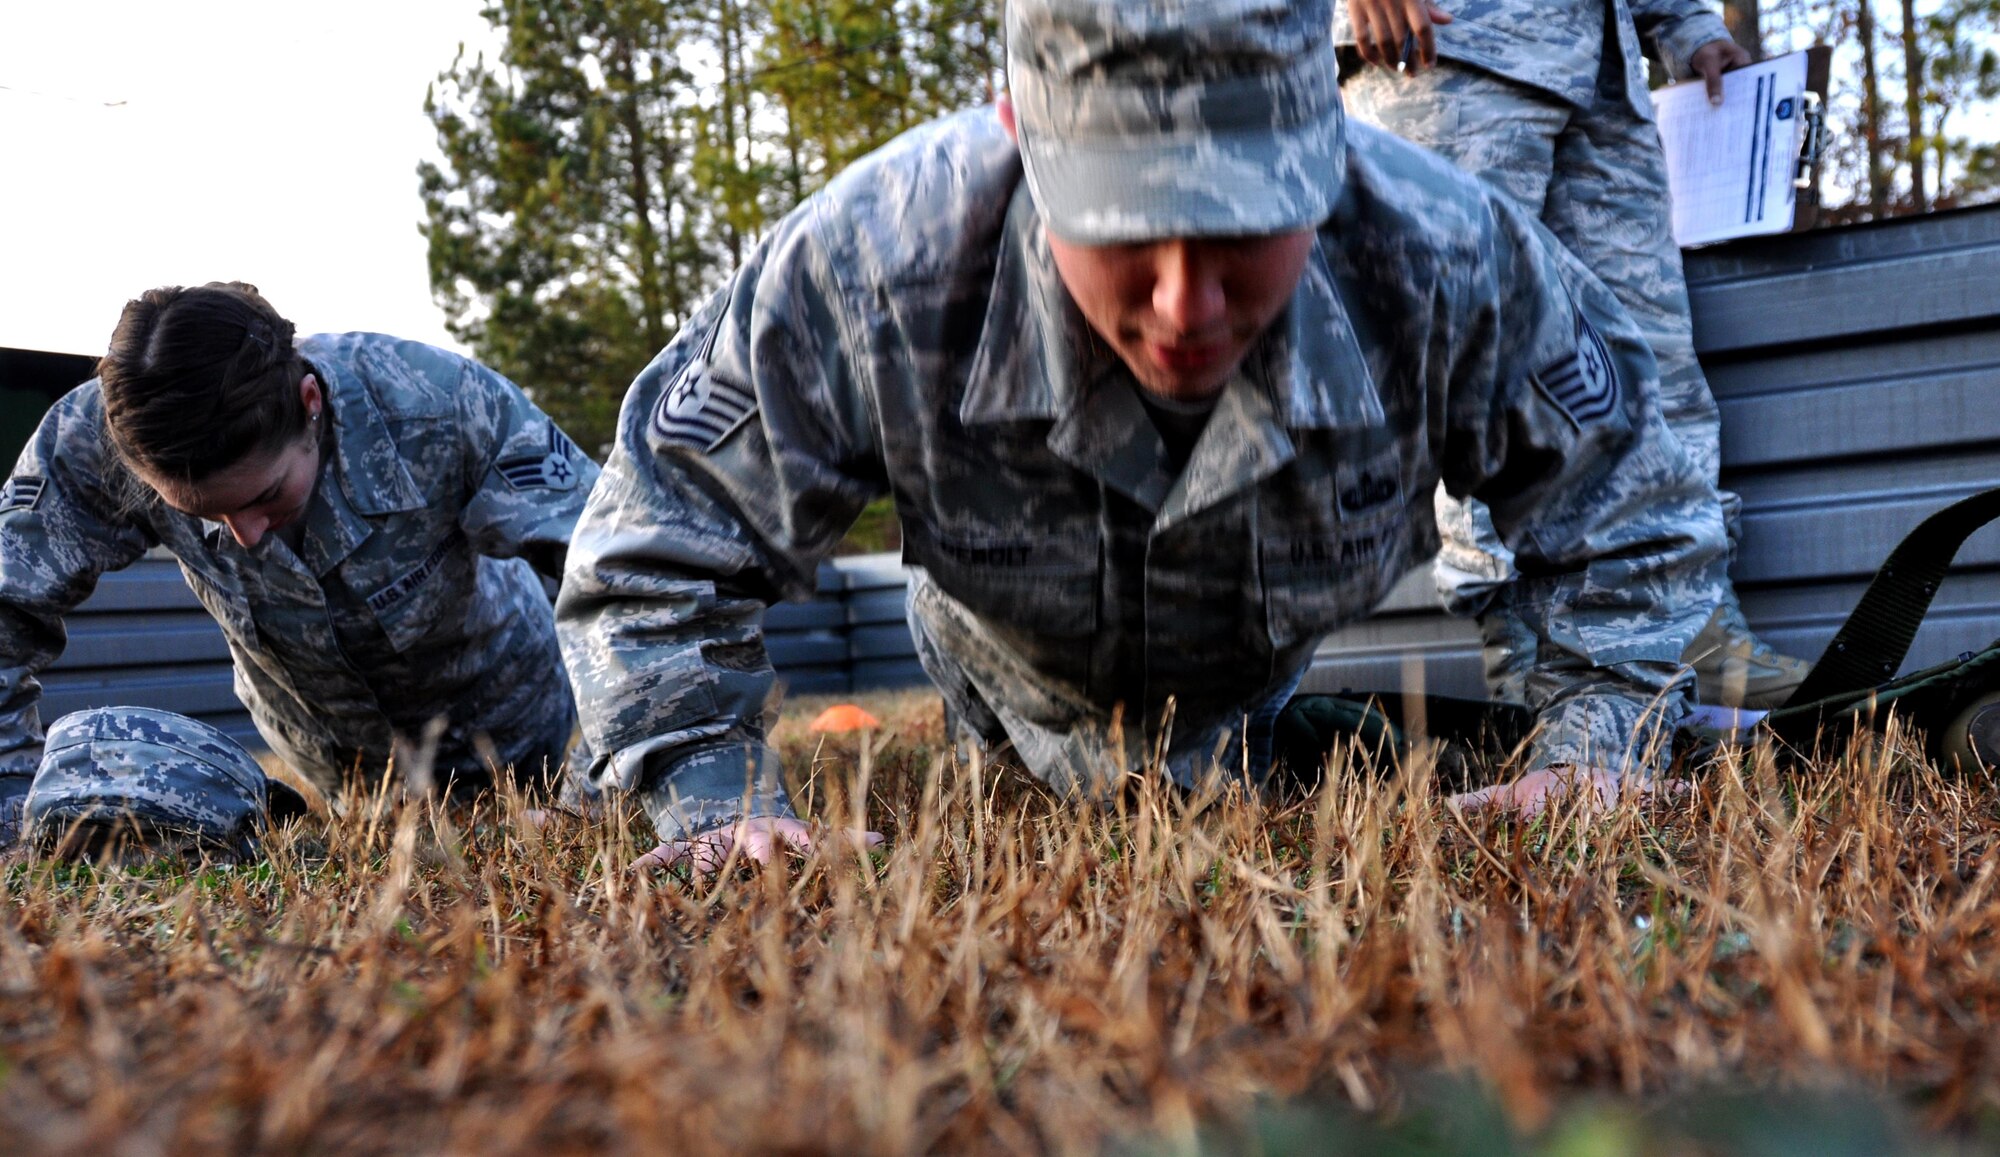 Senior Airman Jessica McMillan and Tech. Sgt. Harold Debolt, both from the 445th Force Support Squadron at Wright Patterson Air Force Base, Ohio, perform push-ups for the scavenger hunt portion of the Readiness Challenge for Force Support Silver Flag at Dobbins Air Reserve Base, Georgia, March 12, 2015. The team fired a paintball gun at a target to see how many push-ups they would have to do. (U.S. Air Force photo/Senior Airman Daniel Phelps)